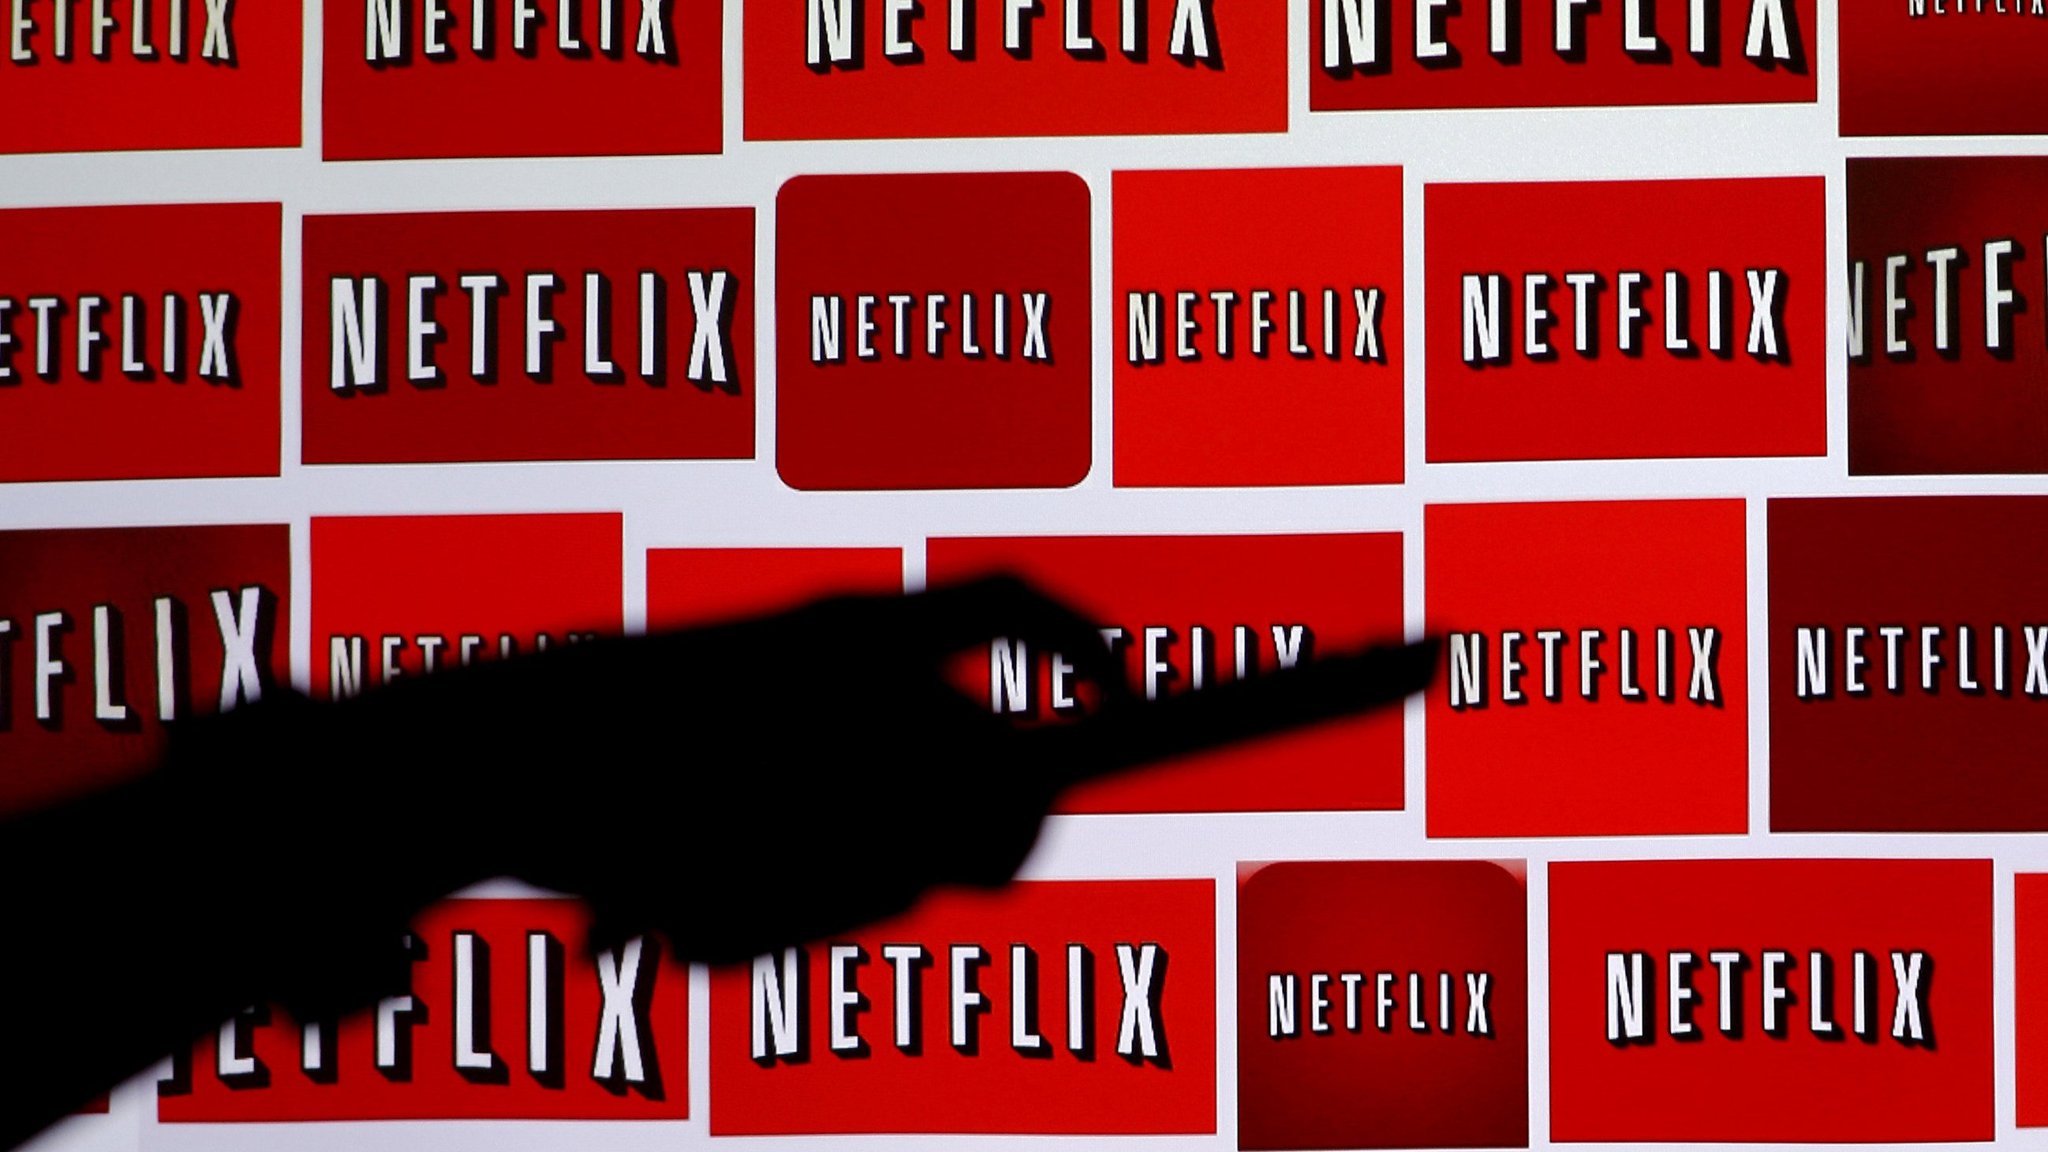 Netflix poaches its new CFO from Activision